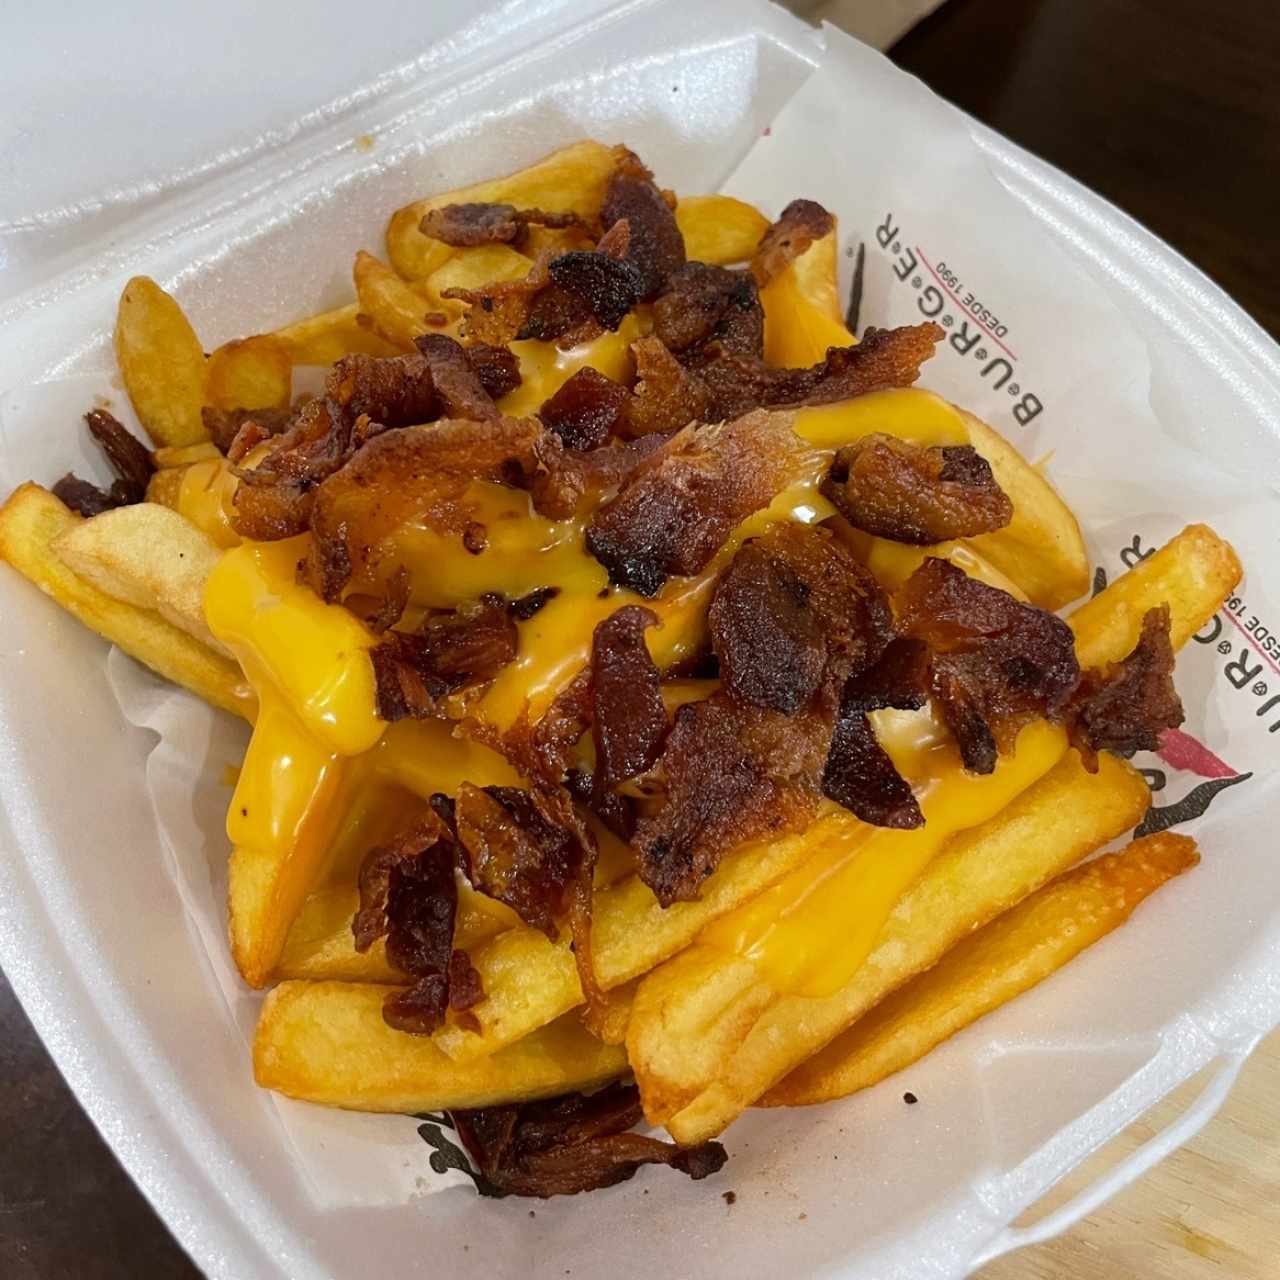 Rock cheese fries